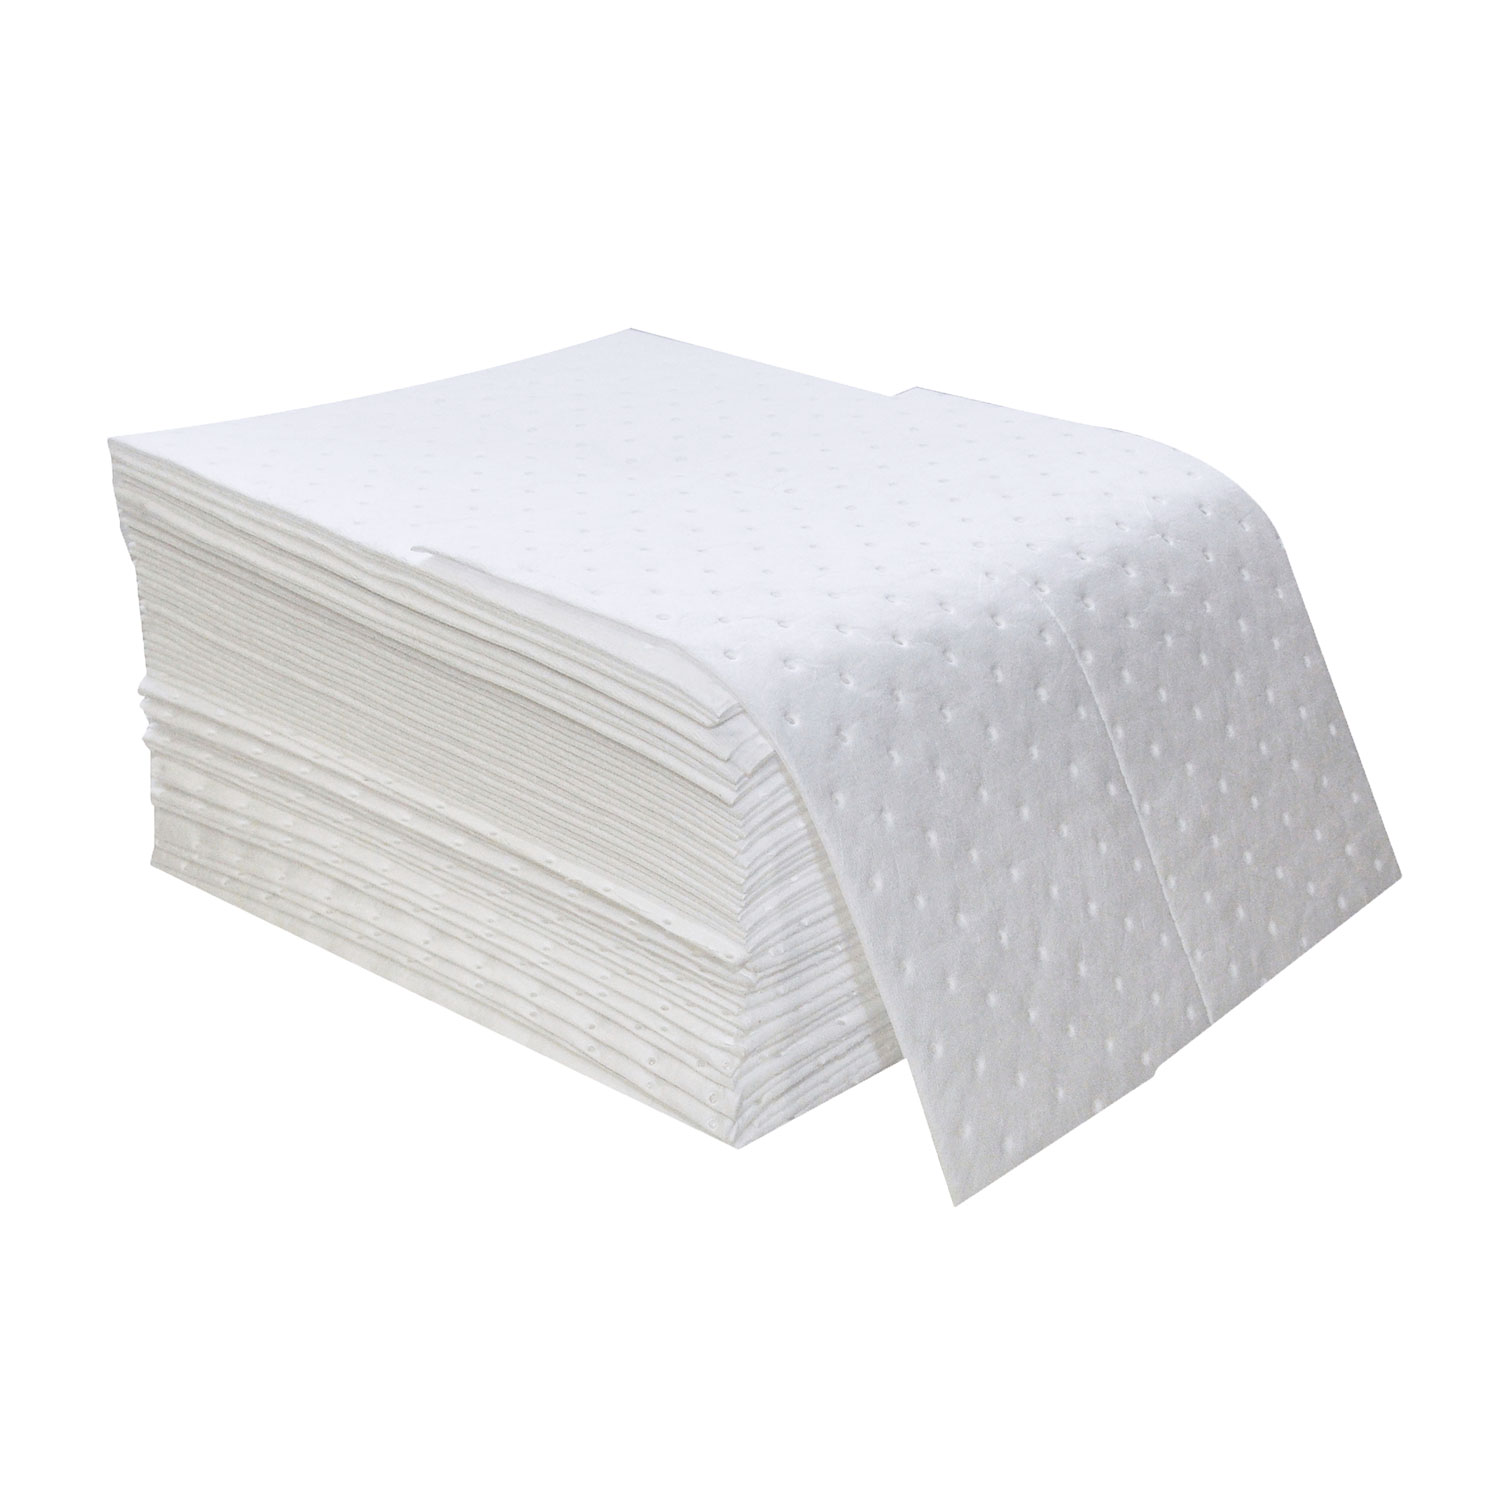 White Oil Absorbent Pad by Spilfyter OS-100, Light Weight